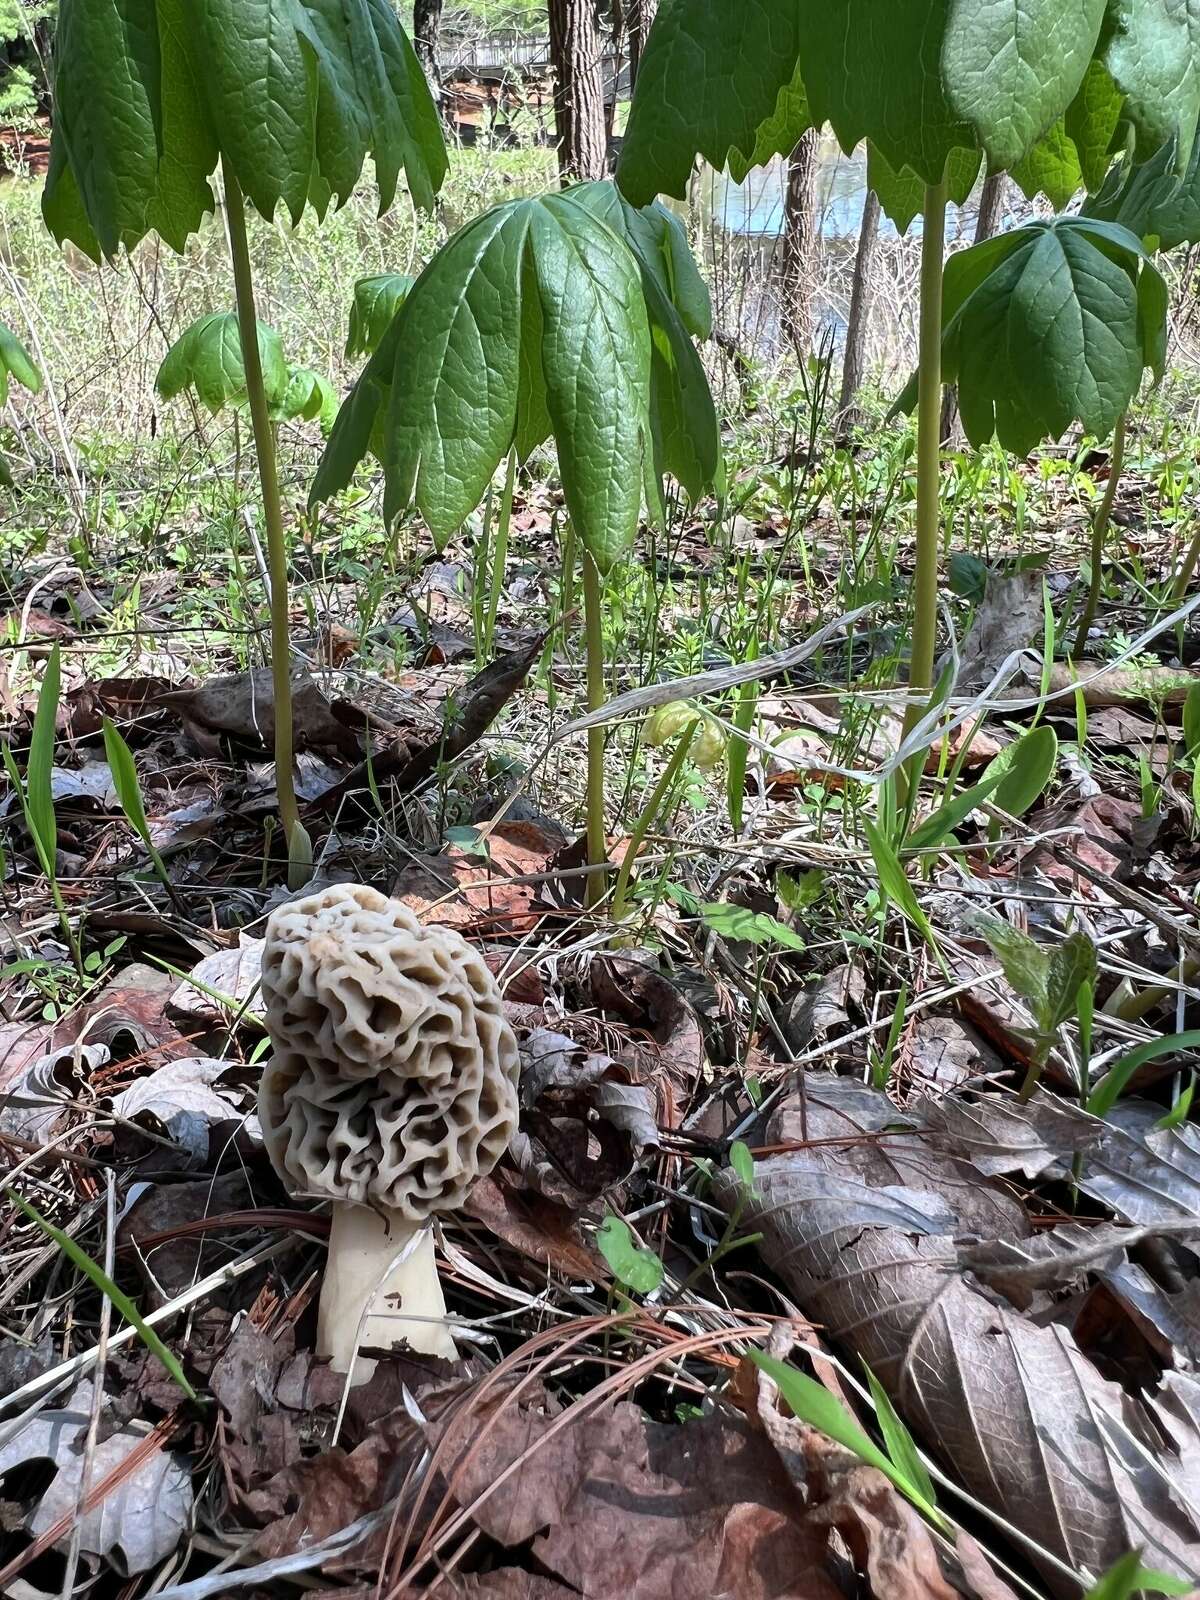 An “early gray” nearly  “inflated” is shown as it comes up in a mayapple patch, grateful that something has broken the early spring soil. The photo was taken last year at the Southern Illinois University Edwardsville Gardens.